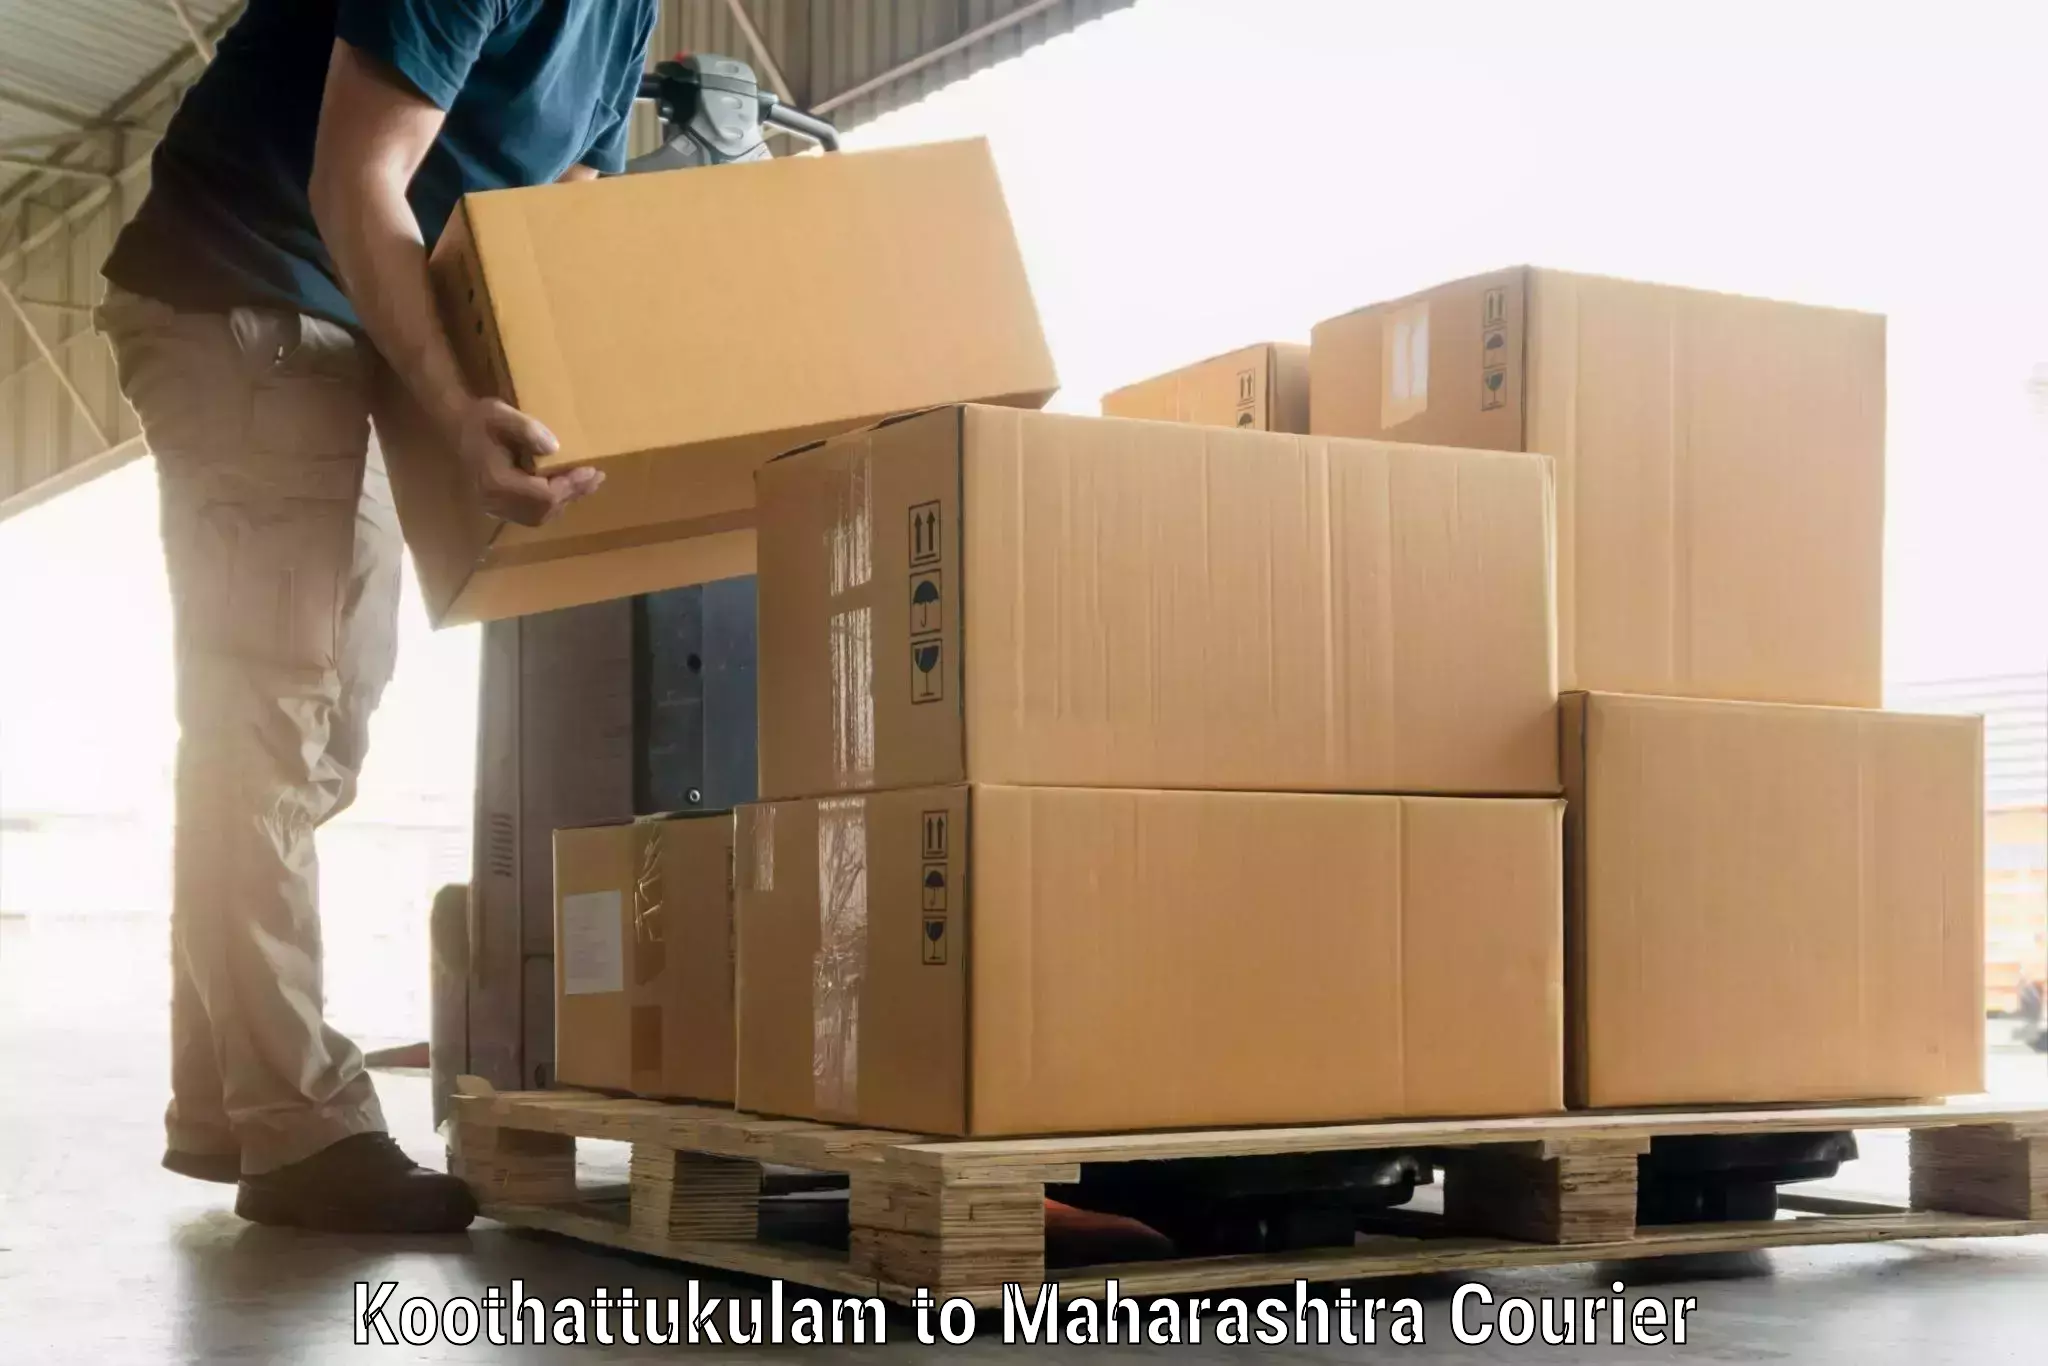 Airport luggage delivery in Koothattukulam to Maharashtra